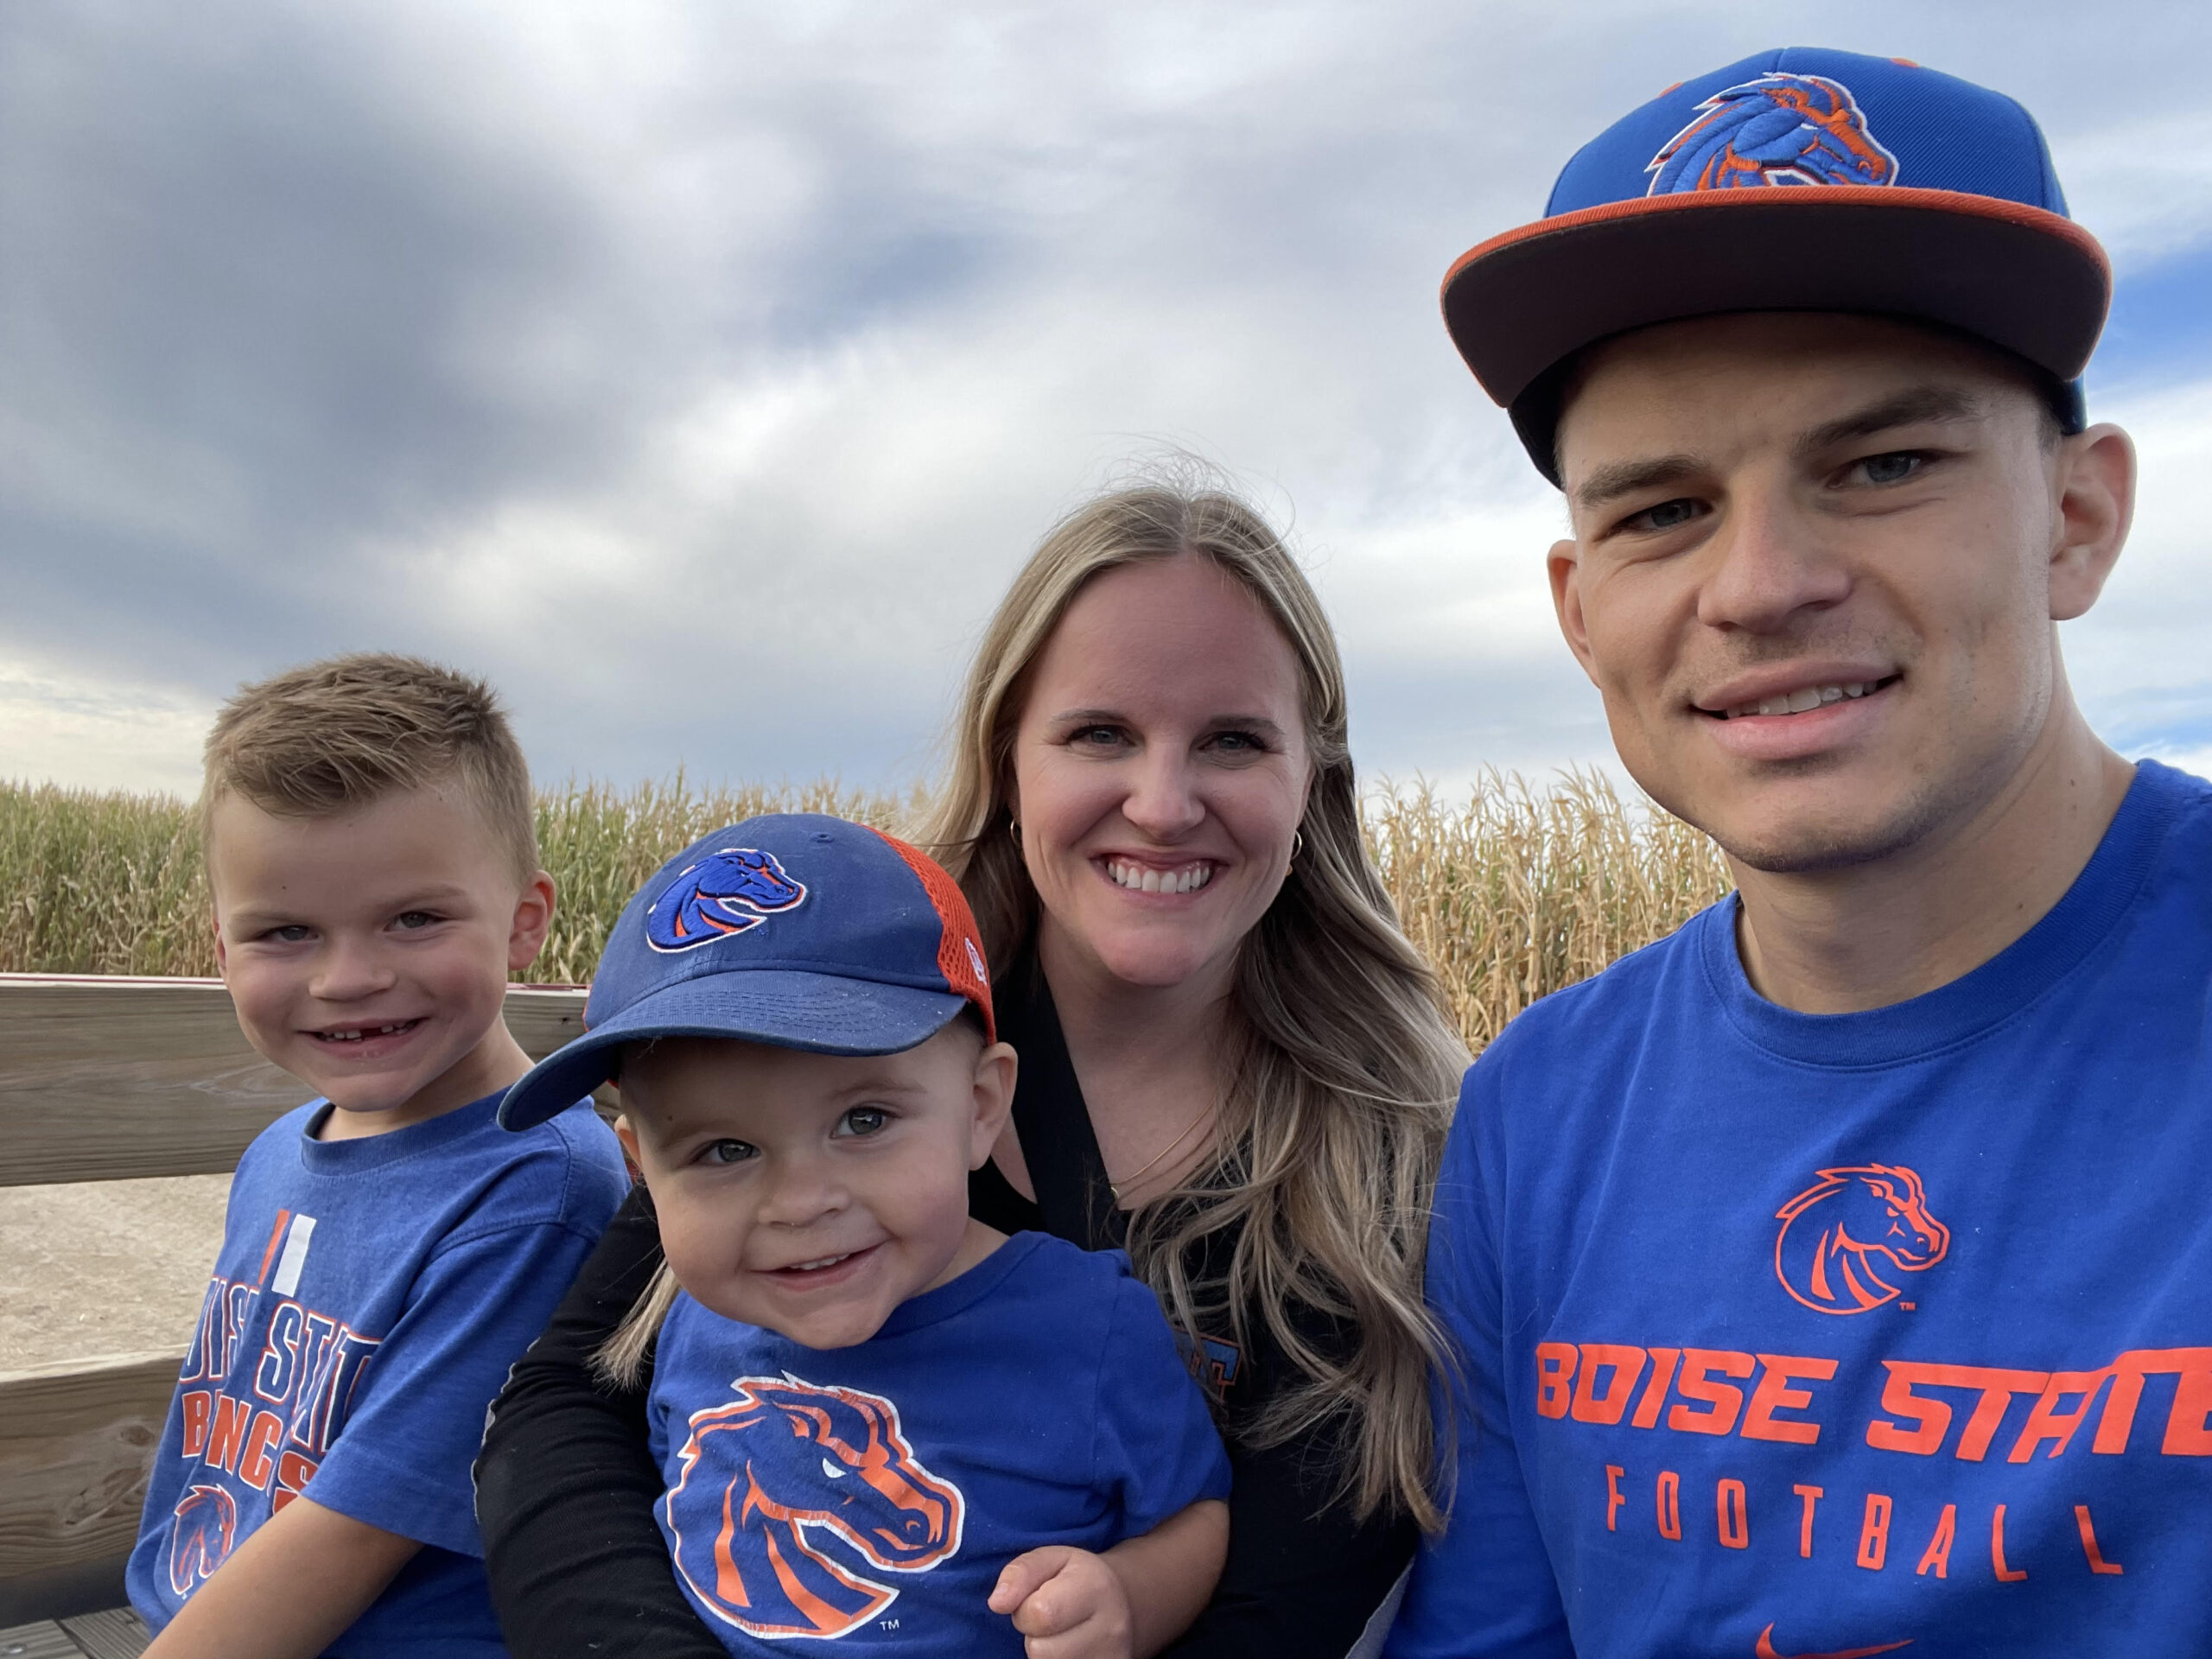 Preston Schow with his wife and two young children in Boise State gear.